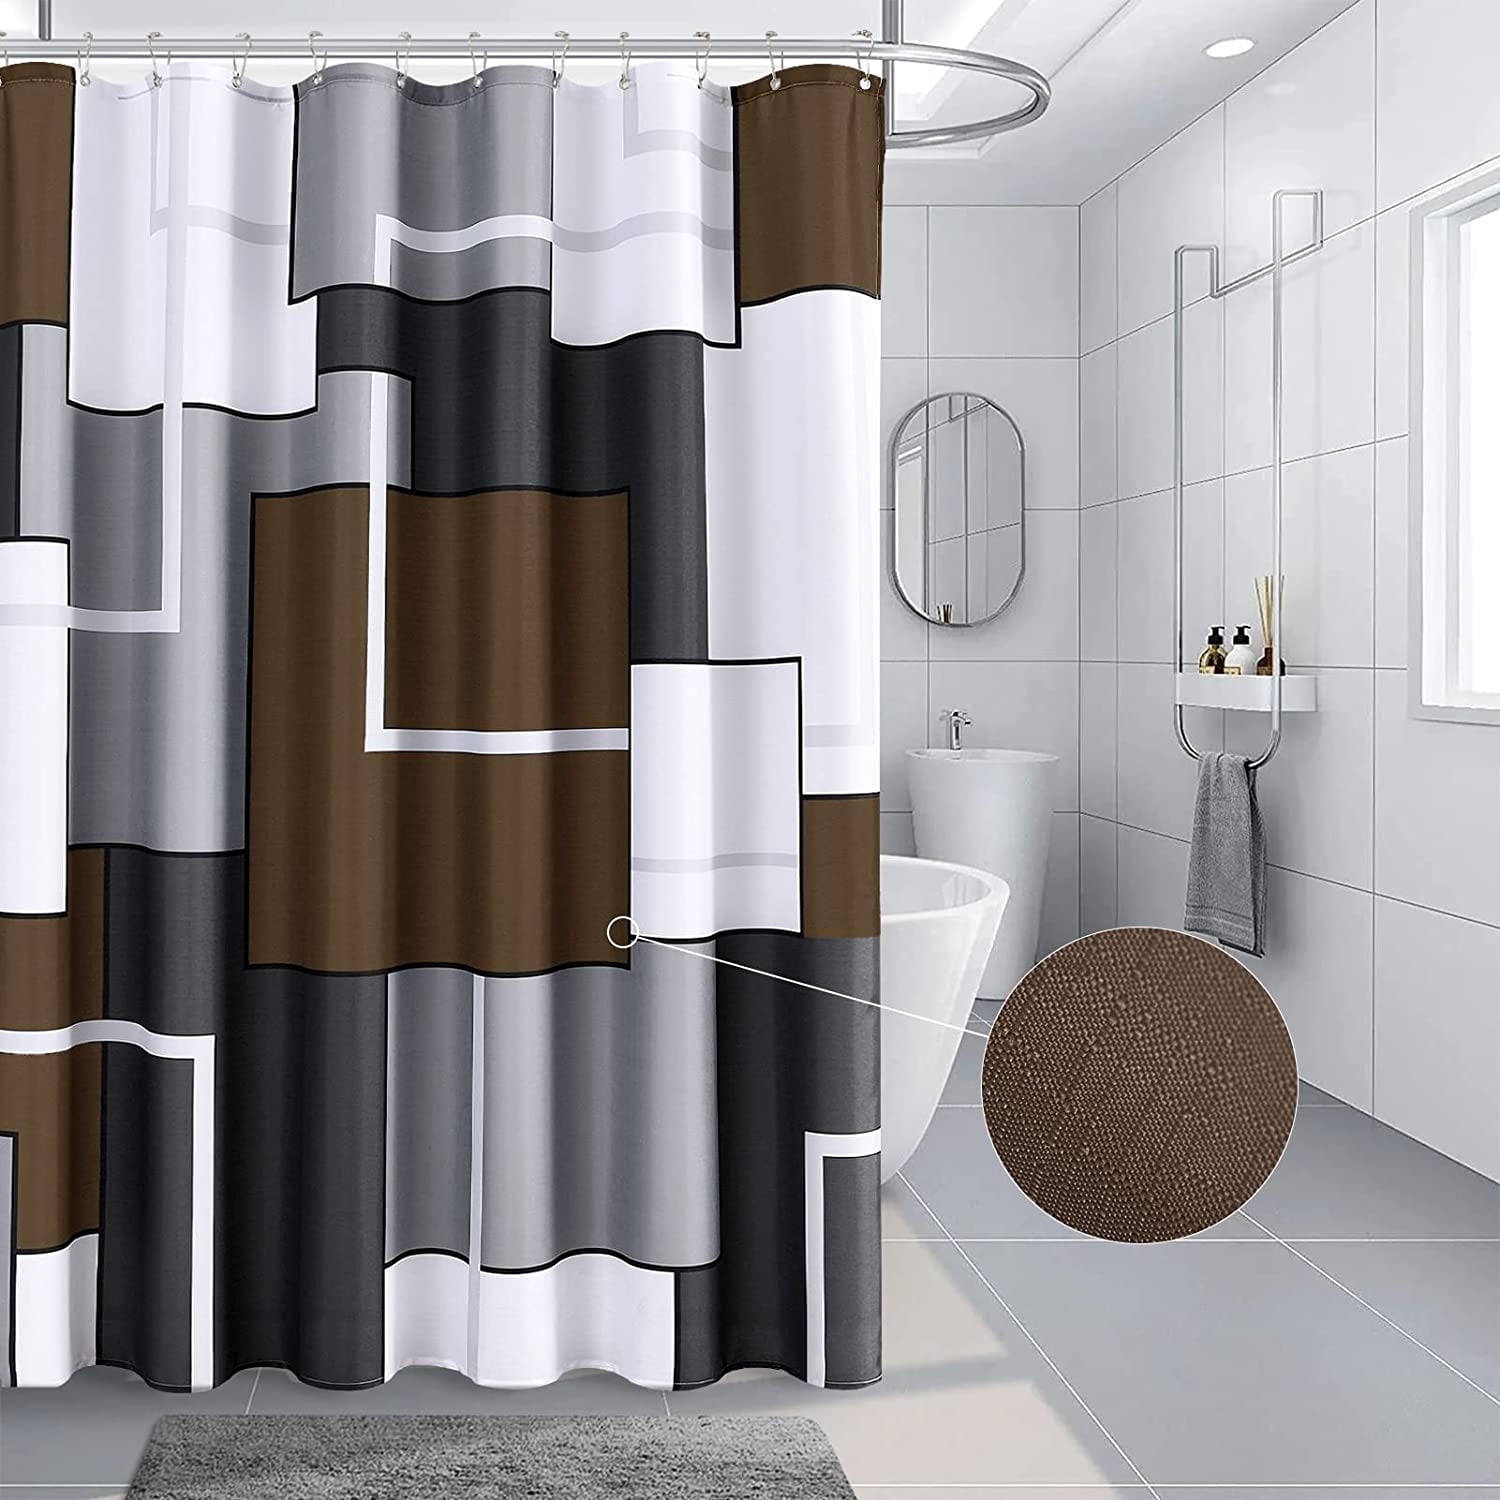 Brown Shower Curtain Set Modern Curtains For Bathroom Fabric And White Abstract Geometric Decorative Bath Gray Water Repellent 72x72 Inch Com